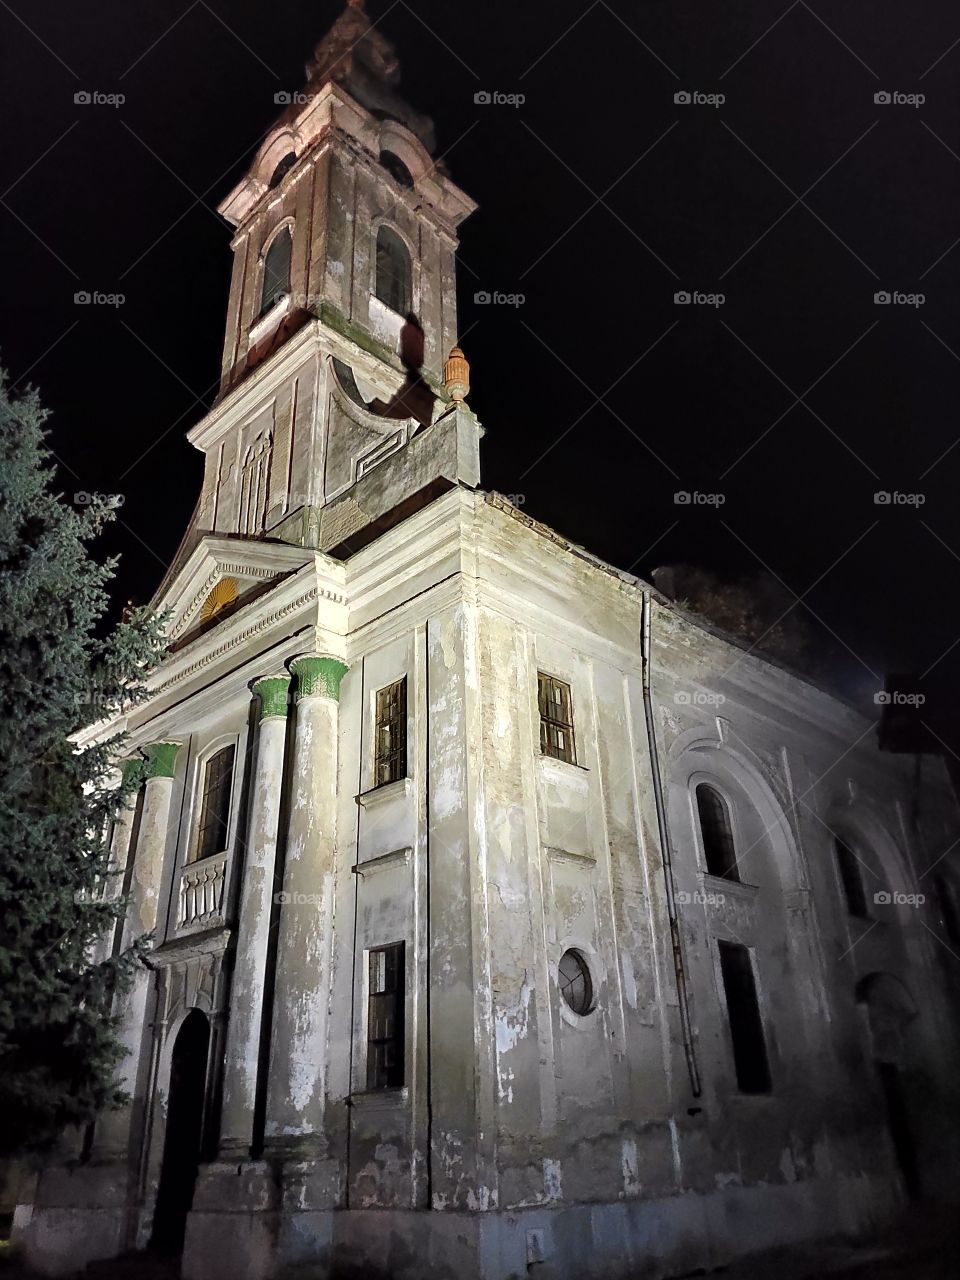 Vrbas Serbia Protestant Church in town centre by night